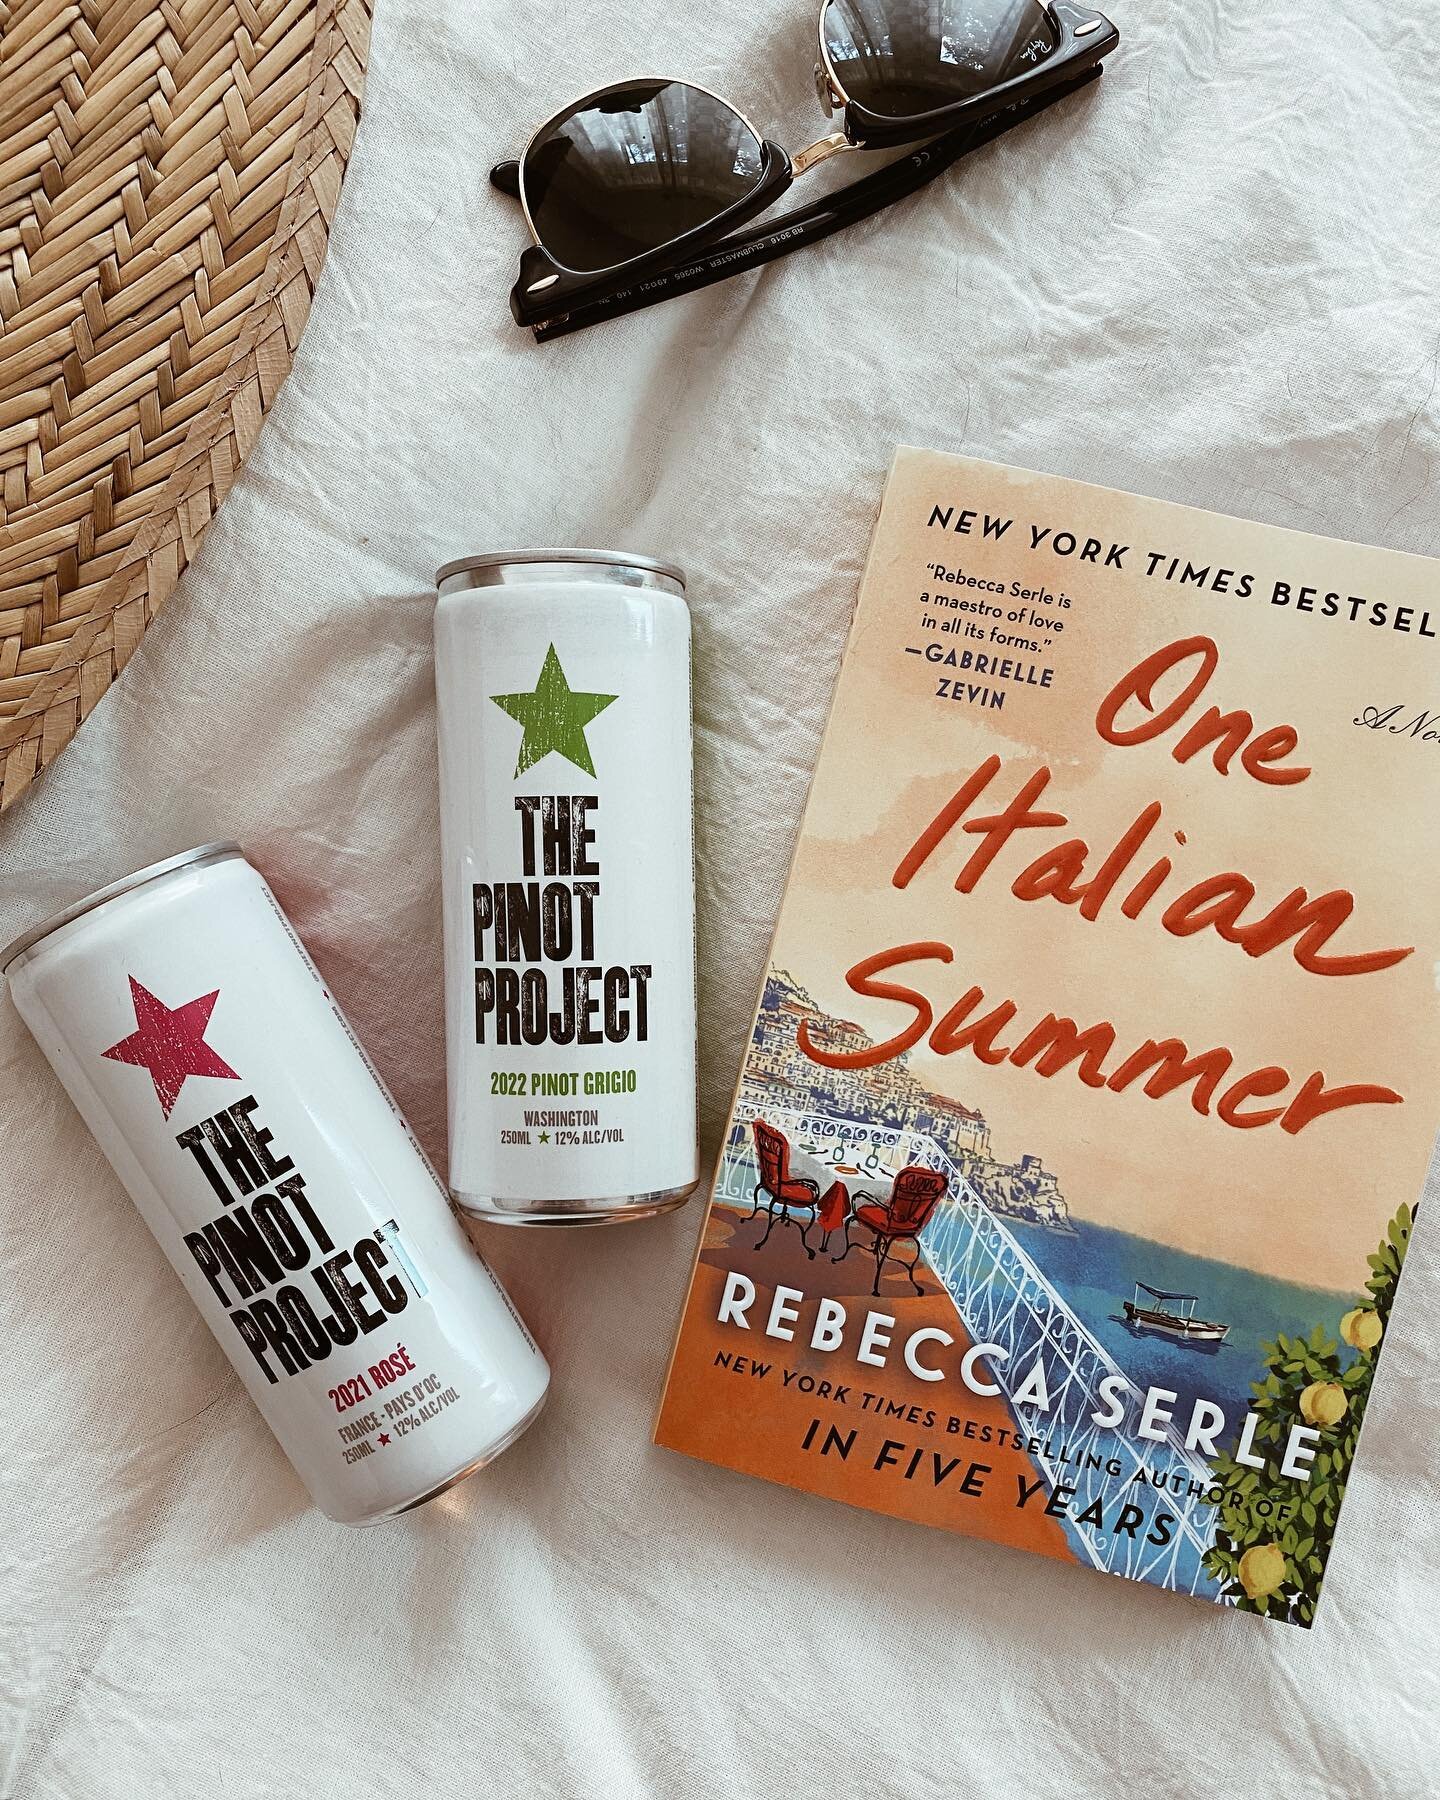 Last year Ivy was dreaming up an Italian summer 🇮🇹🍝🍷☀️for her 30th birthday trip but (sadly) it has been postponed. Luckily she can pretend she&rsquo;s there with books and good wine! Our friends at @thepinotproject partnered with @bookclubfavori